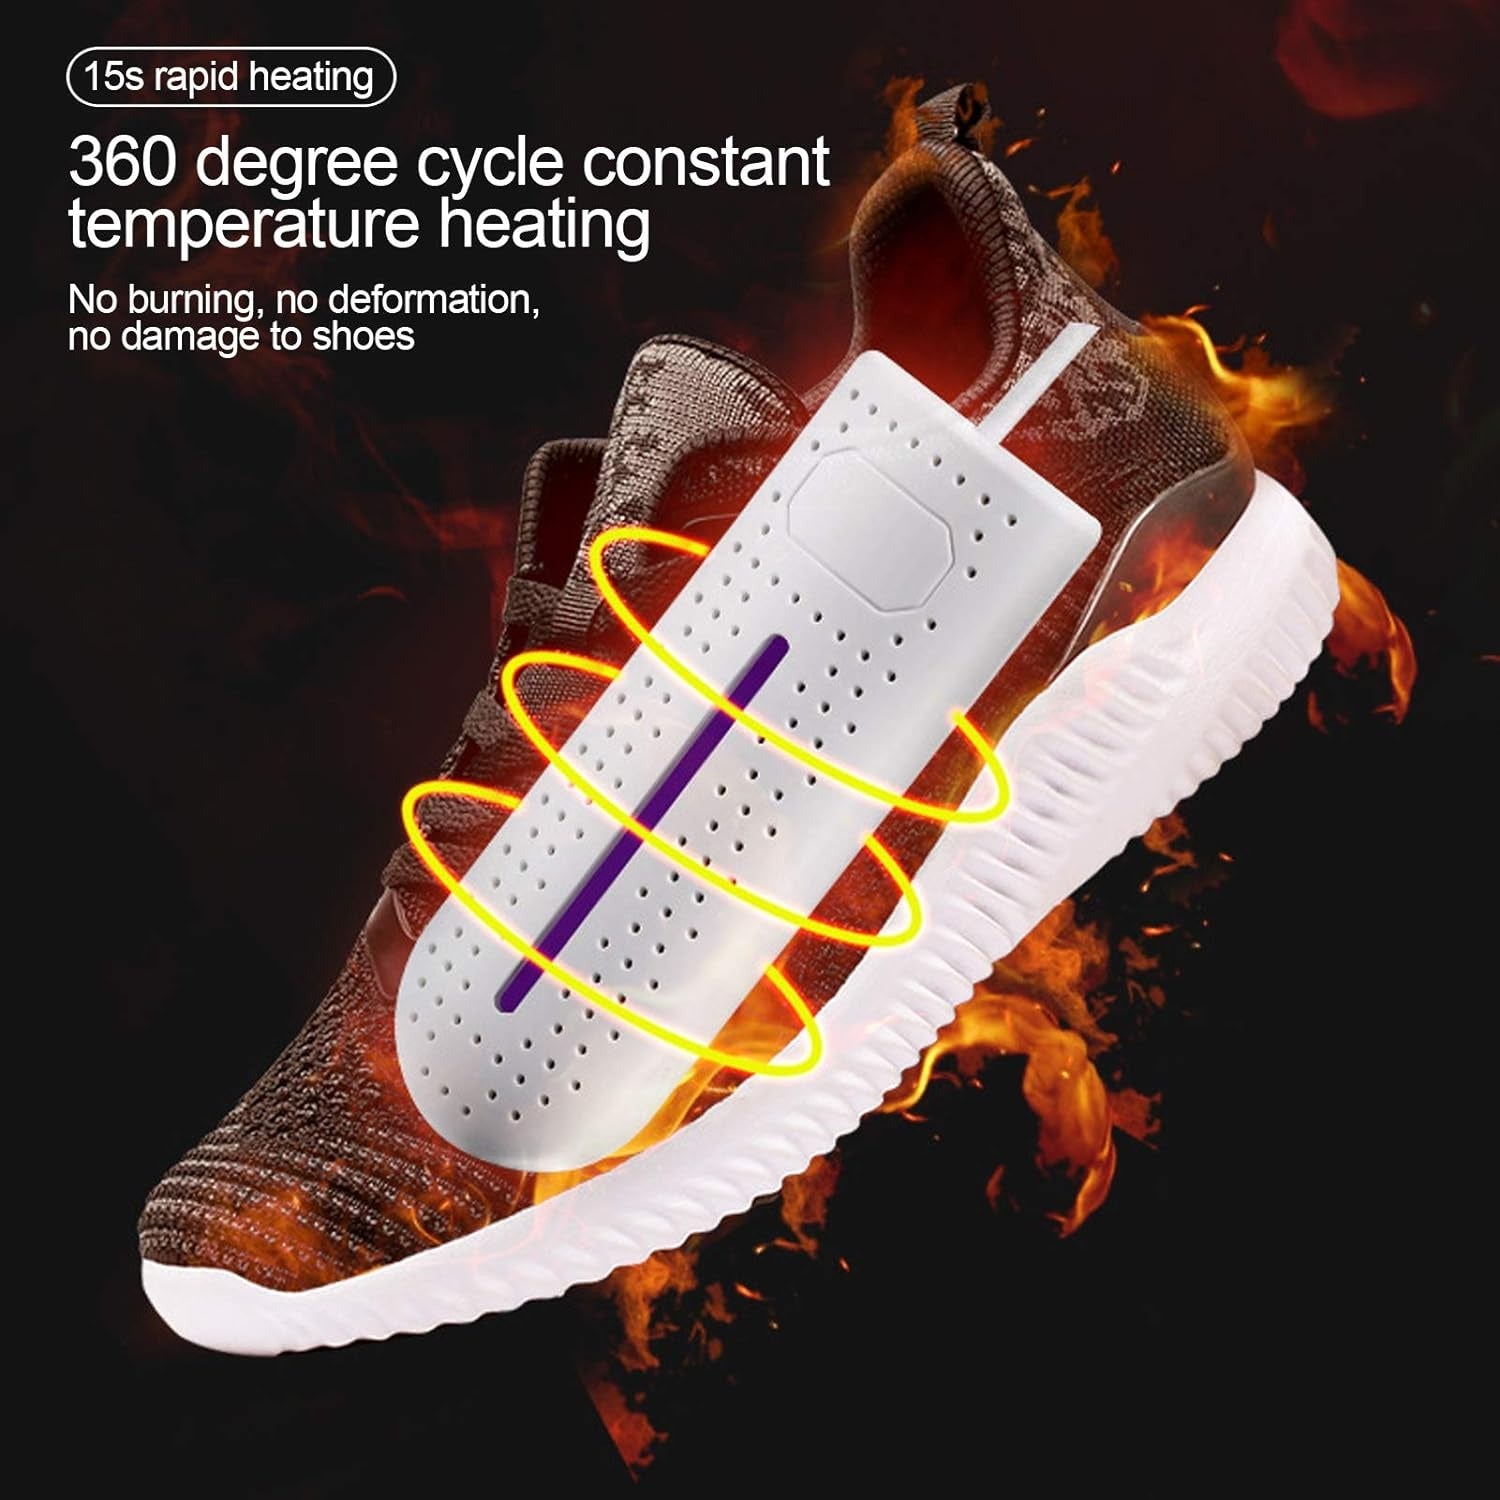 360 degree cycle constant temperature heating with Electric Shoe Dryer